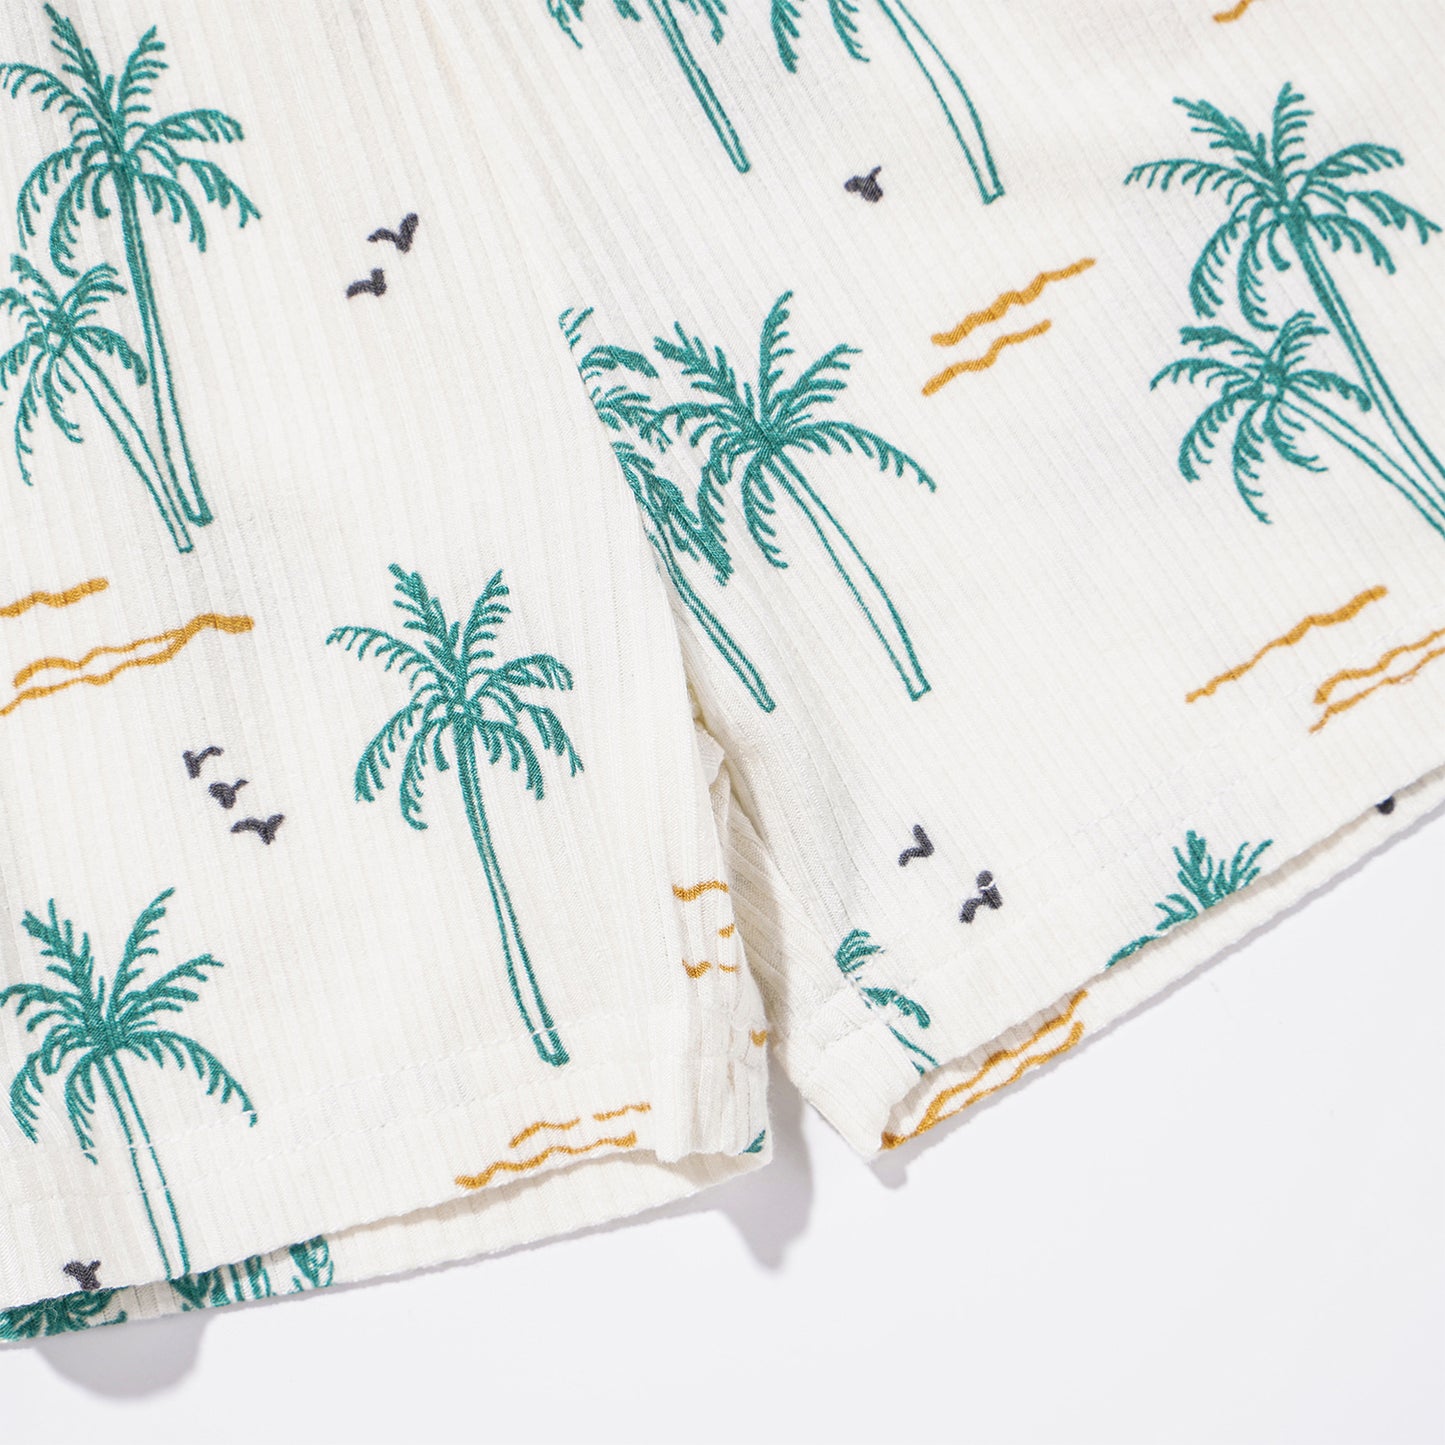 Palm Trees Small Ribbed Shorts Two-Piece Set